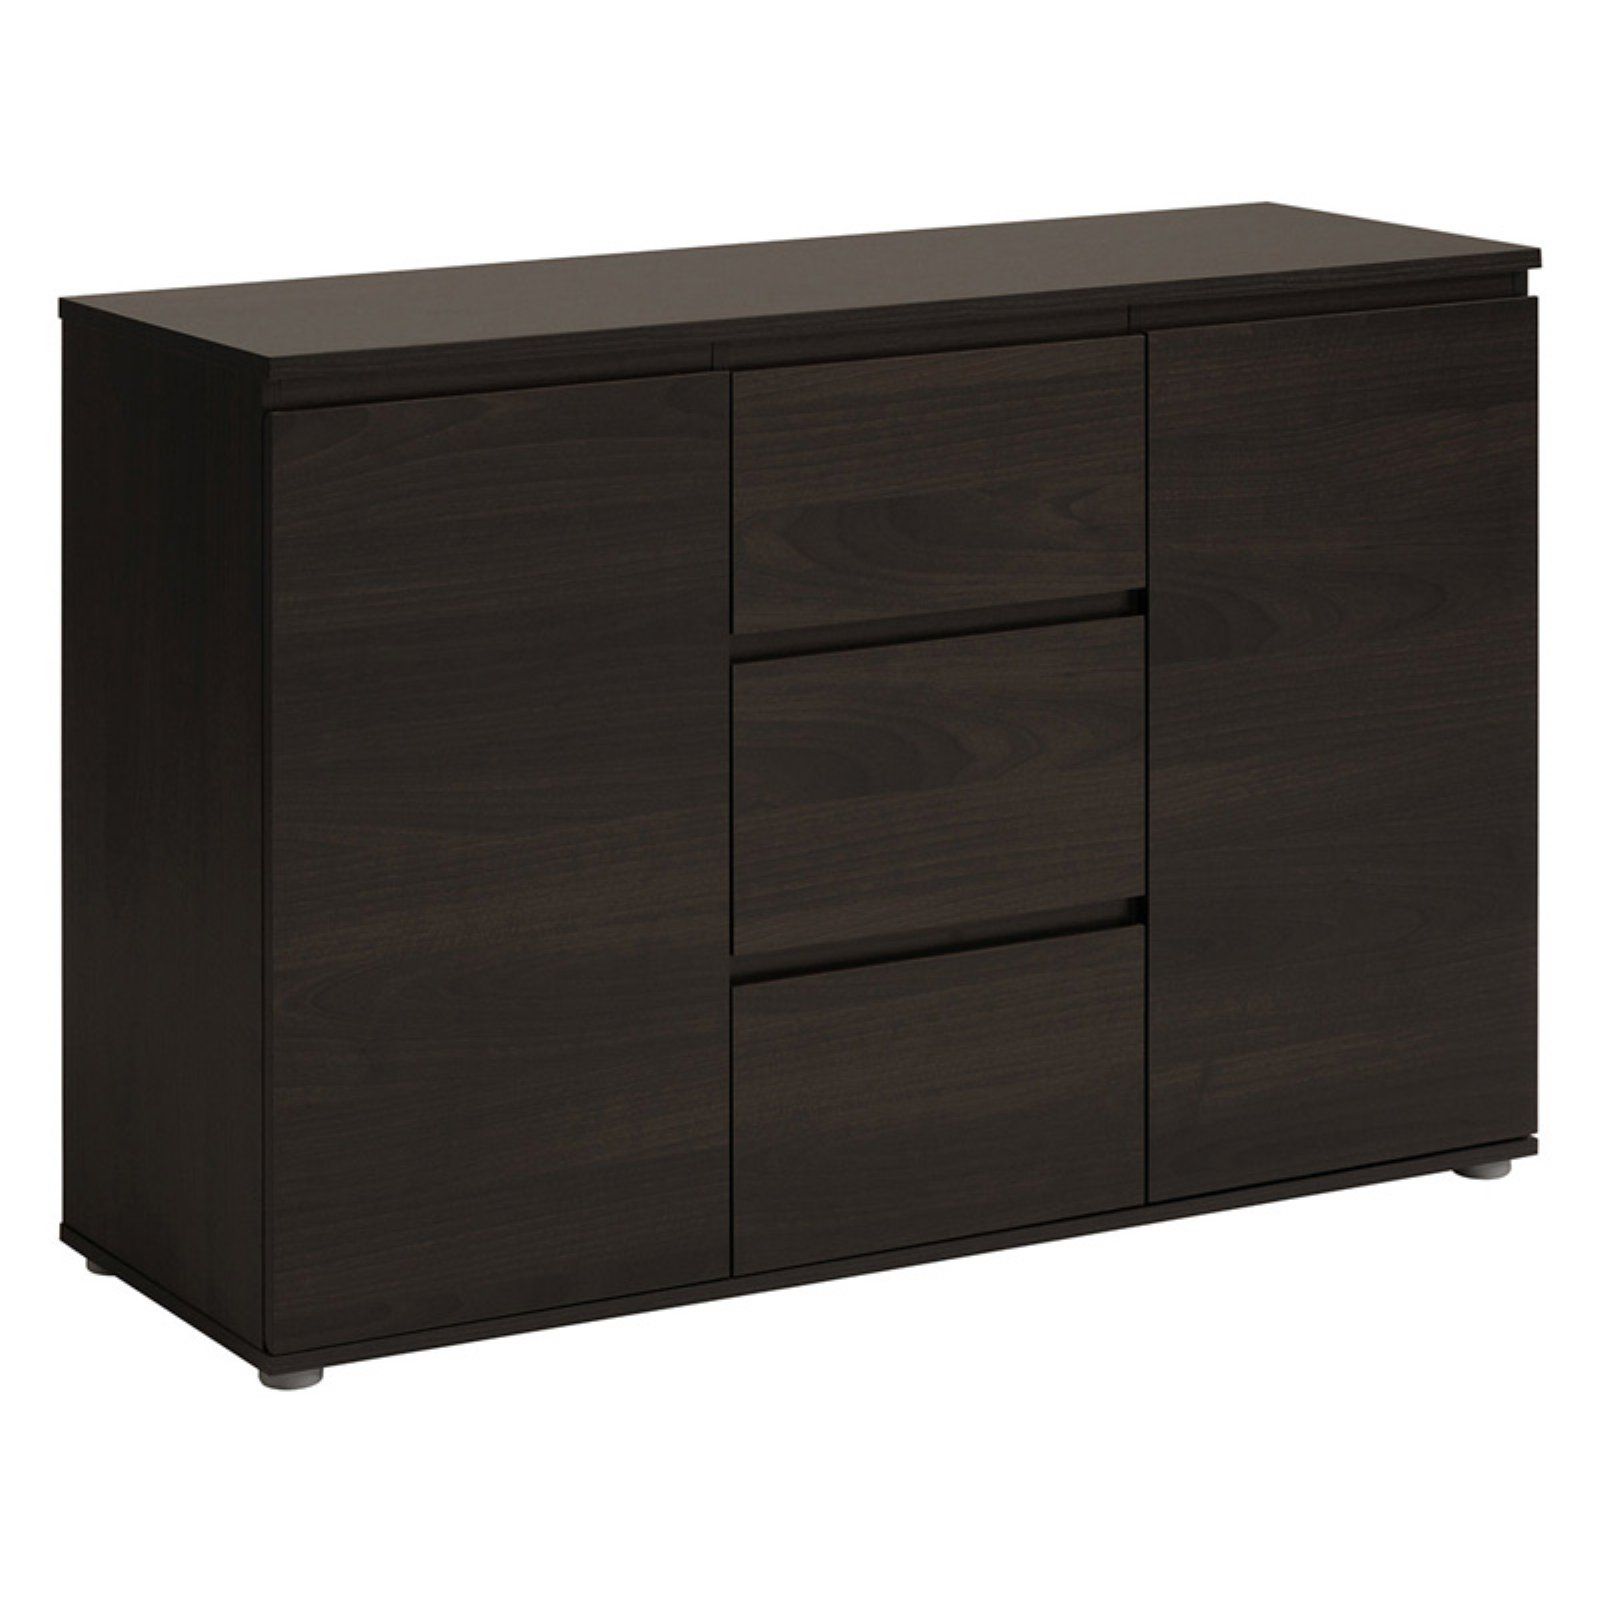 Parisot Neo Sideboard | Products In 2019 | Sideboard Pertaining To Most Up To Date Wendell Sideboards (View 14 of 20)